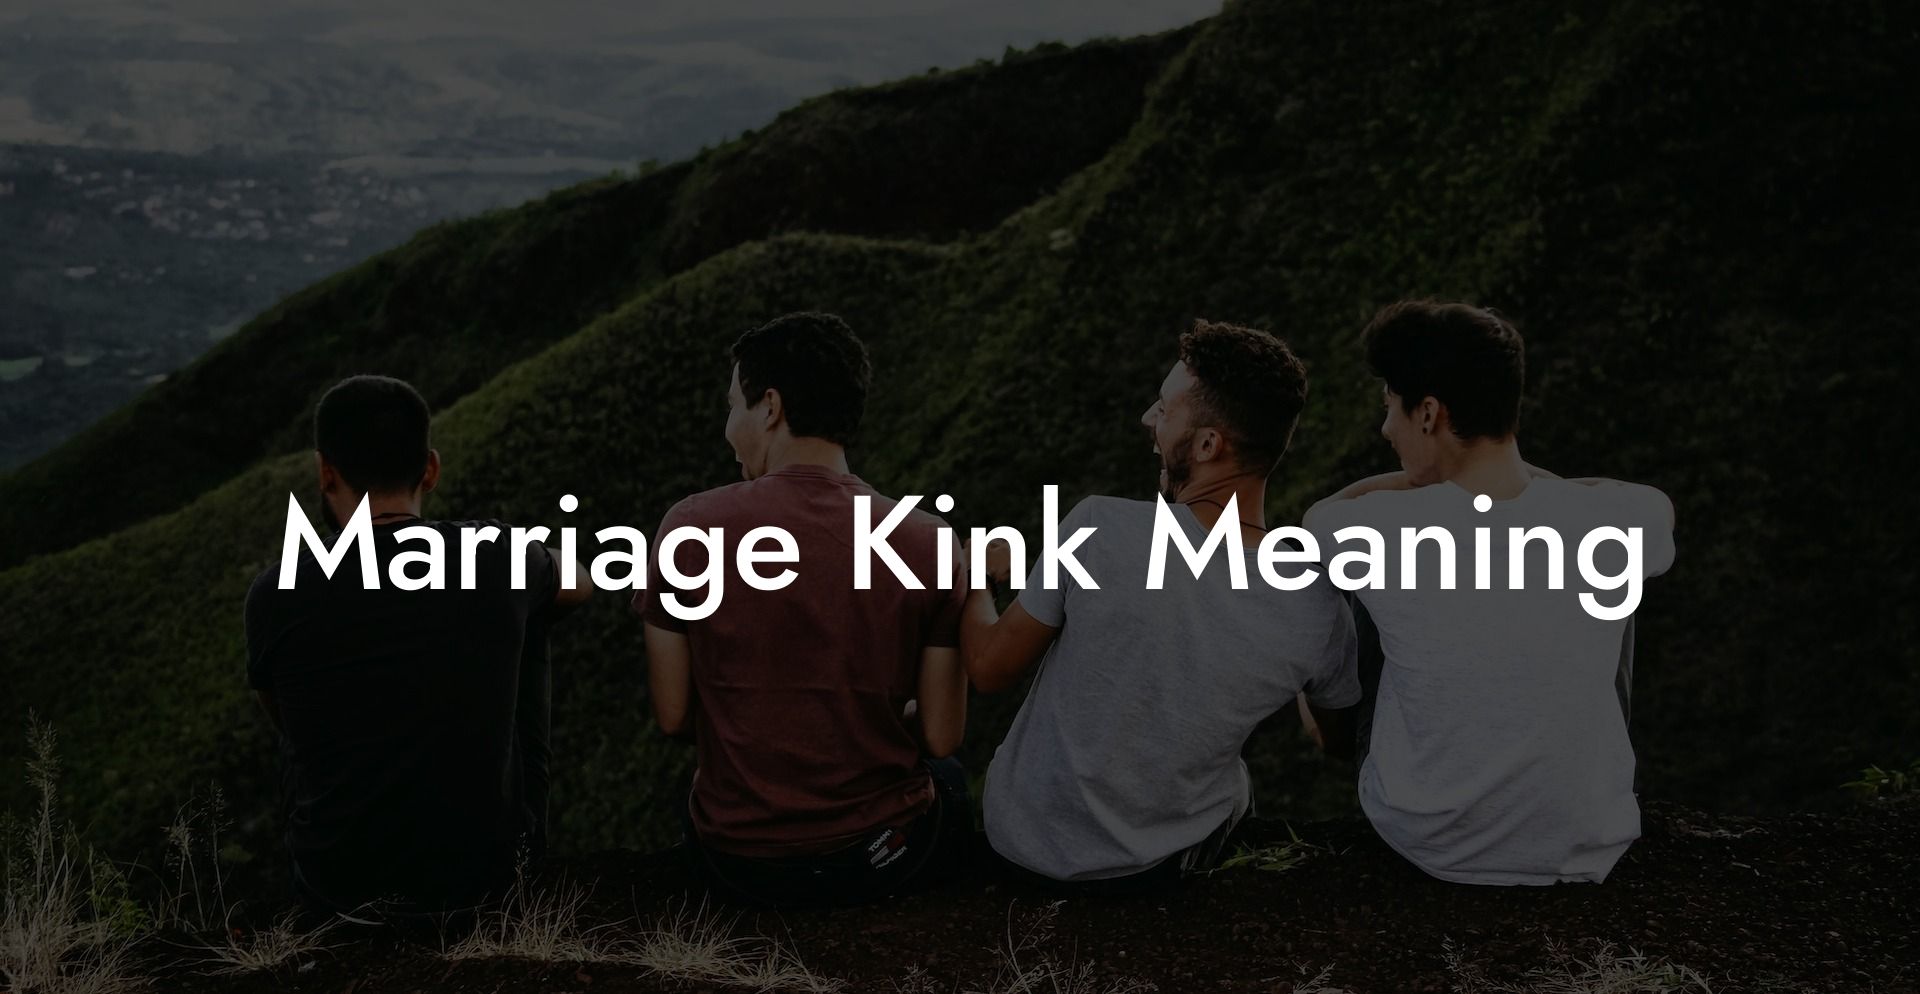 Marriage Kink Meaning